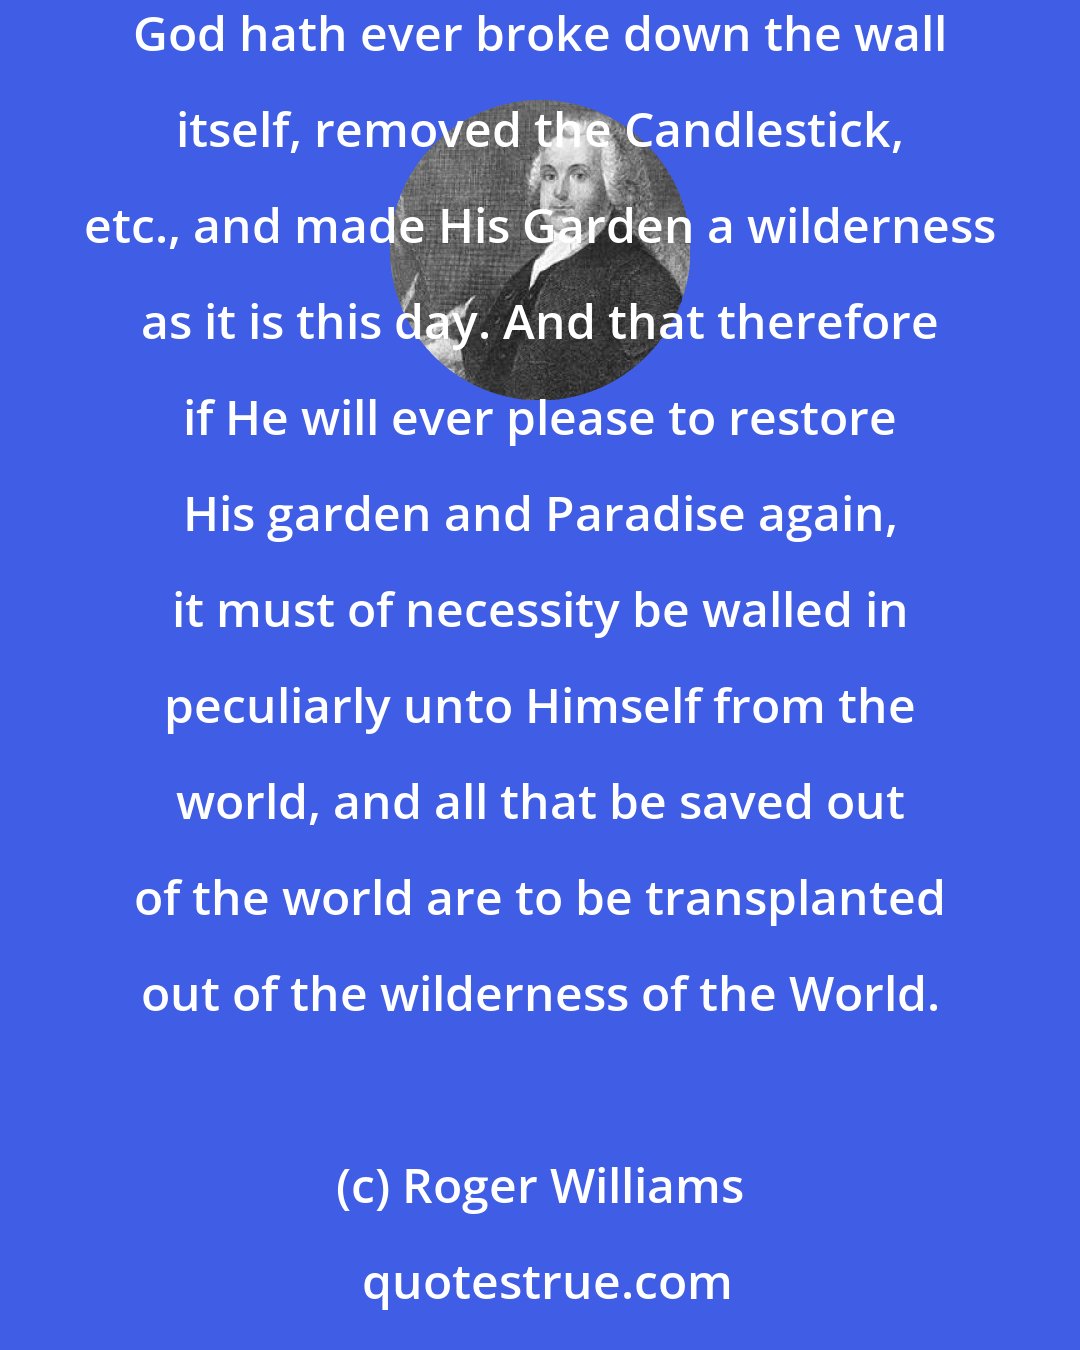 Roger Williams: When they [the Church] have opened a gap in the hedge or wall of separation between the garden of the church and the wilderness of the world, God hath ever broke down the wall itself, removed the Candlestick, etc., and made His Garden a wilderness as it is this day. And that therefore if He will ever please to restore His garden and Paradise again, it must of necessity be walled in peculiarly unto Himself from the world, and all that be saved out of the world are to be transplanted out of the wilderness of the World.